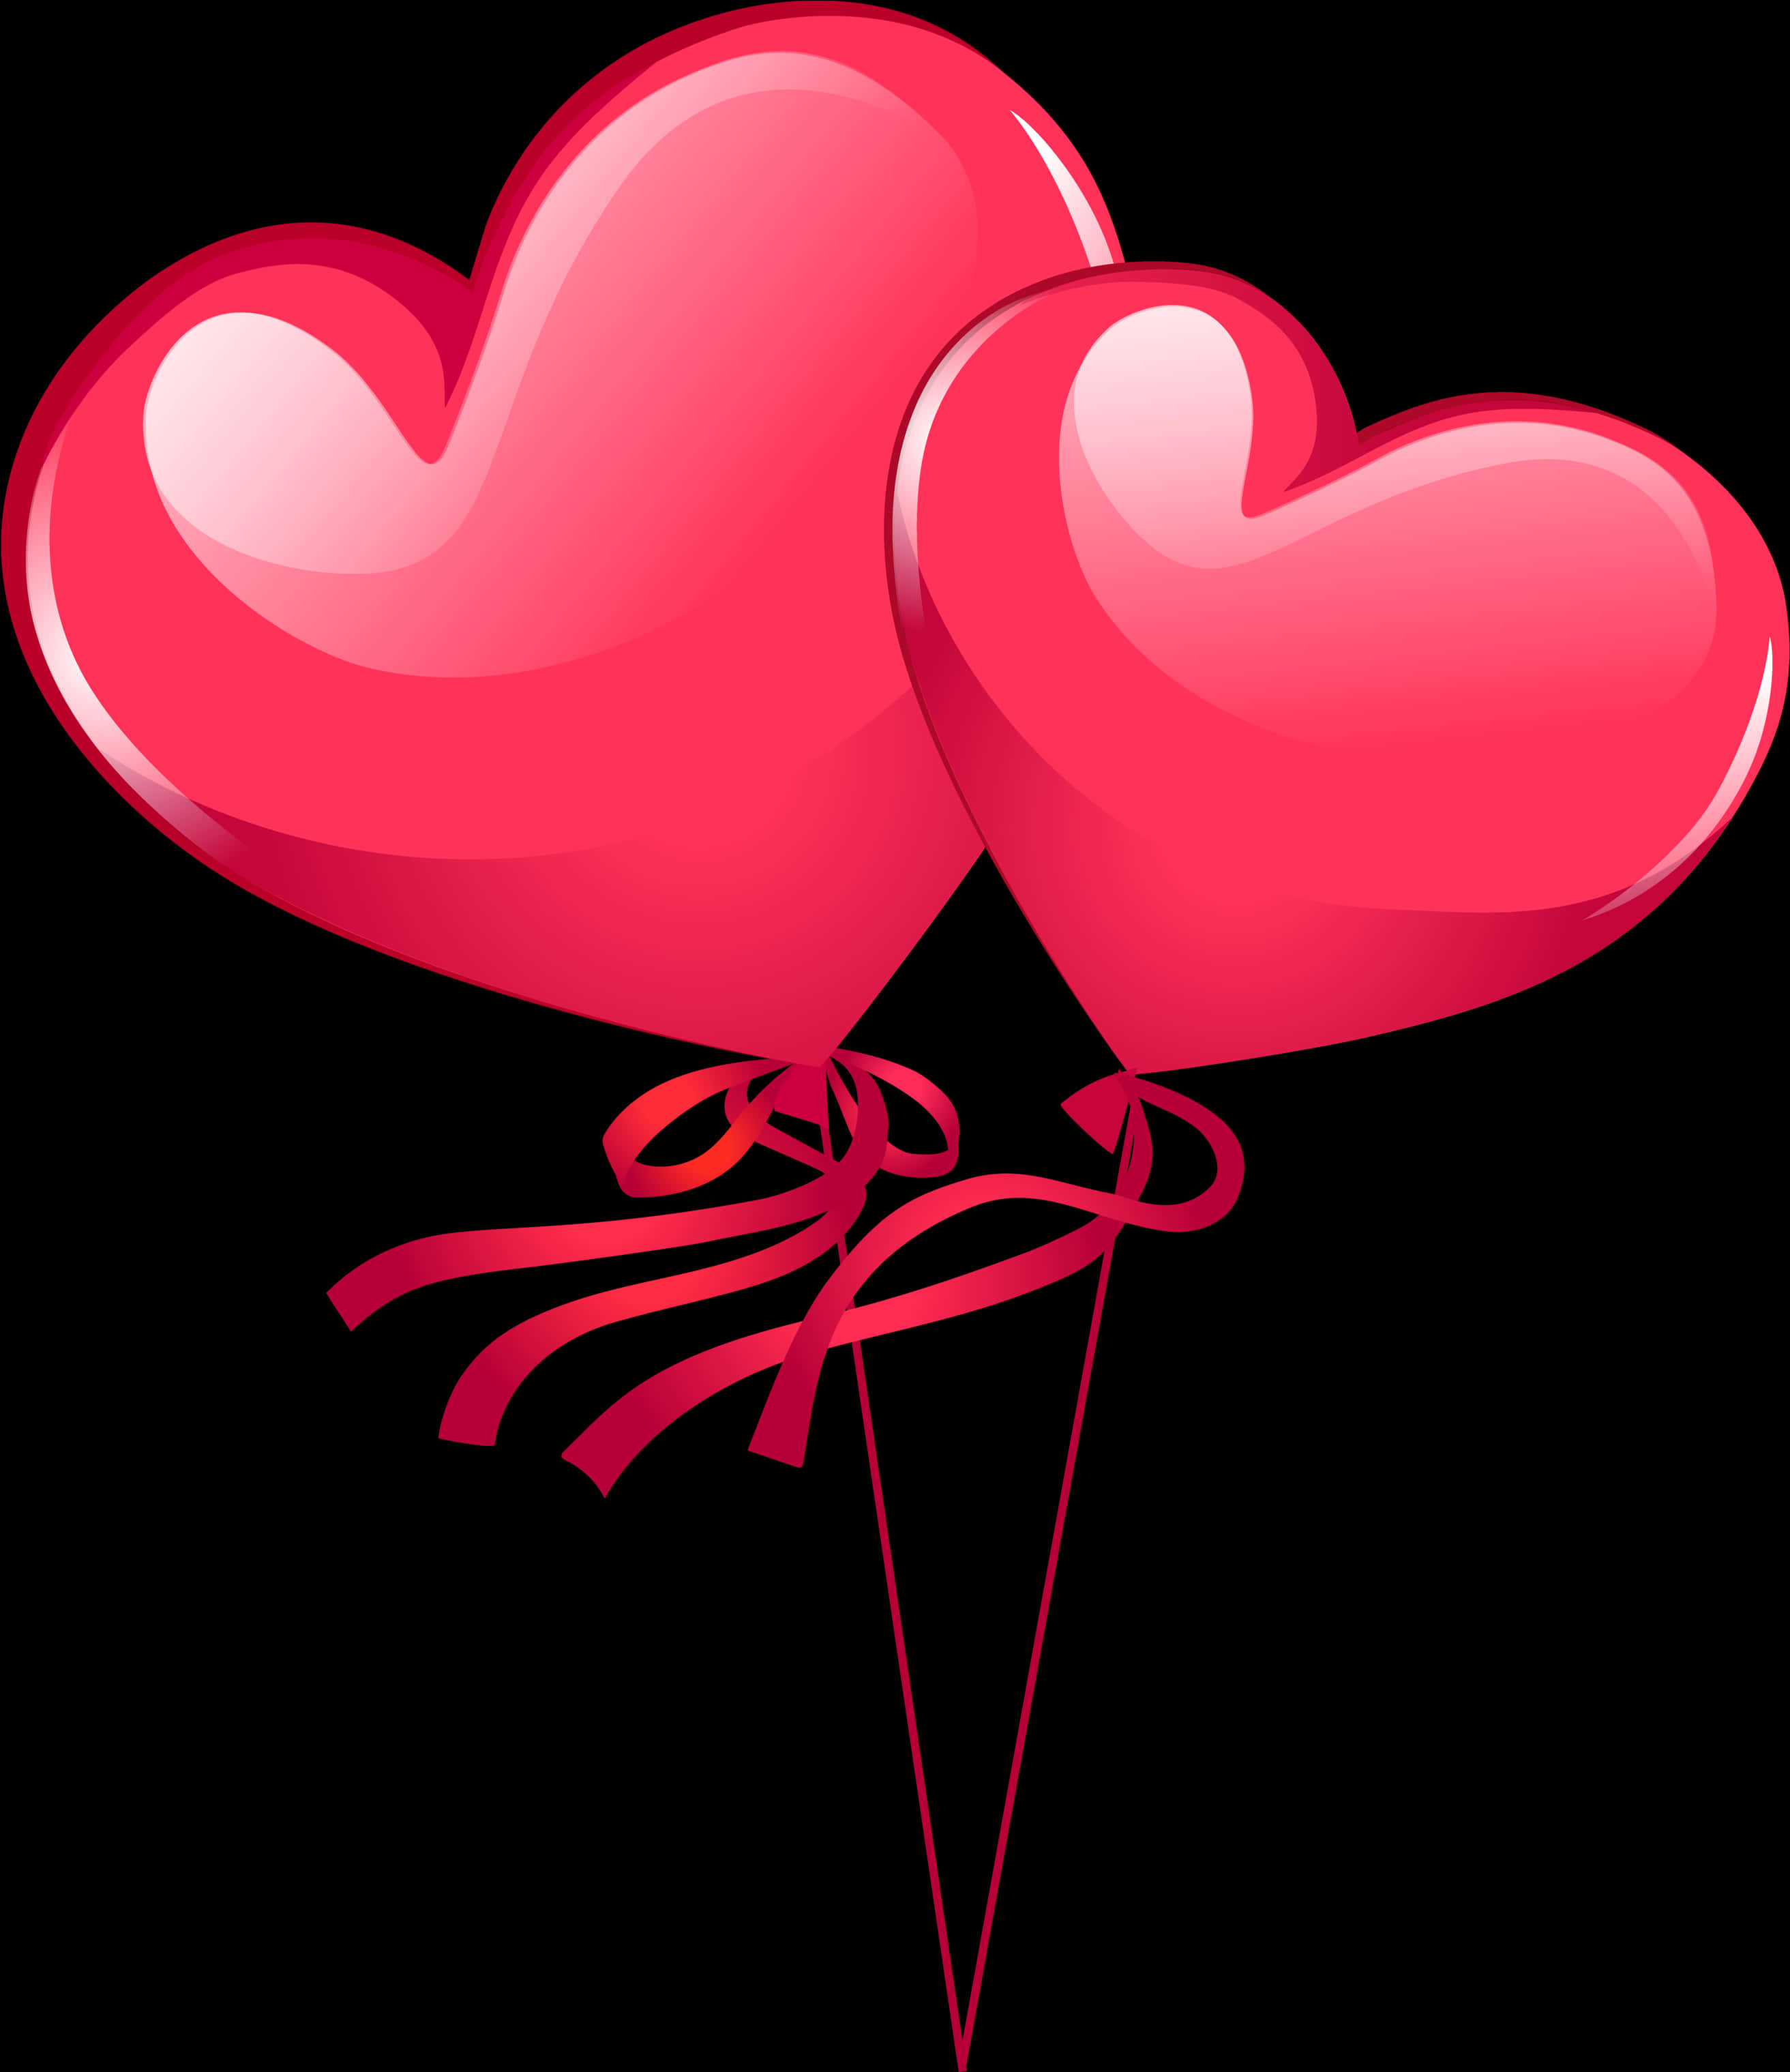 Two Pink Heart Shaped Balloons